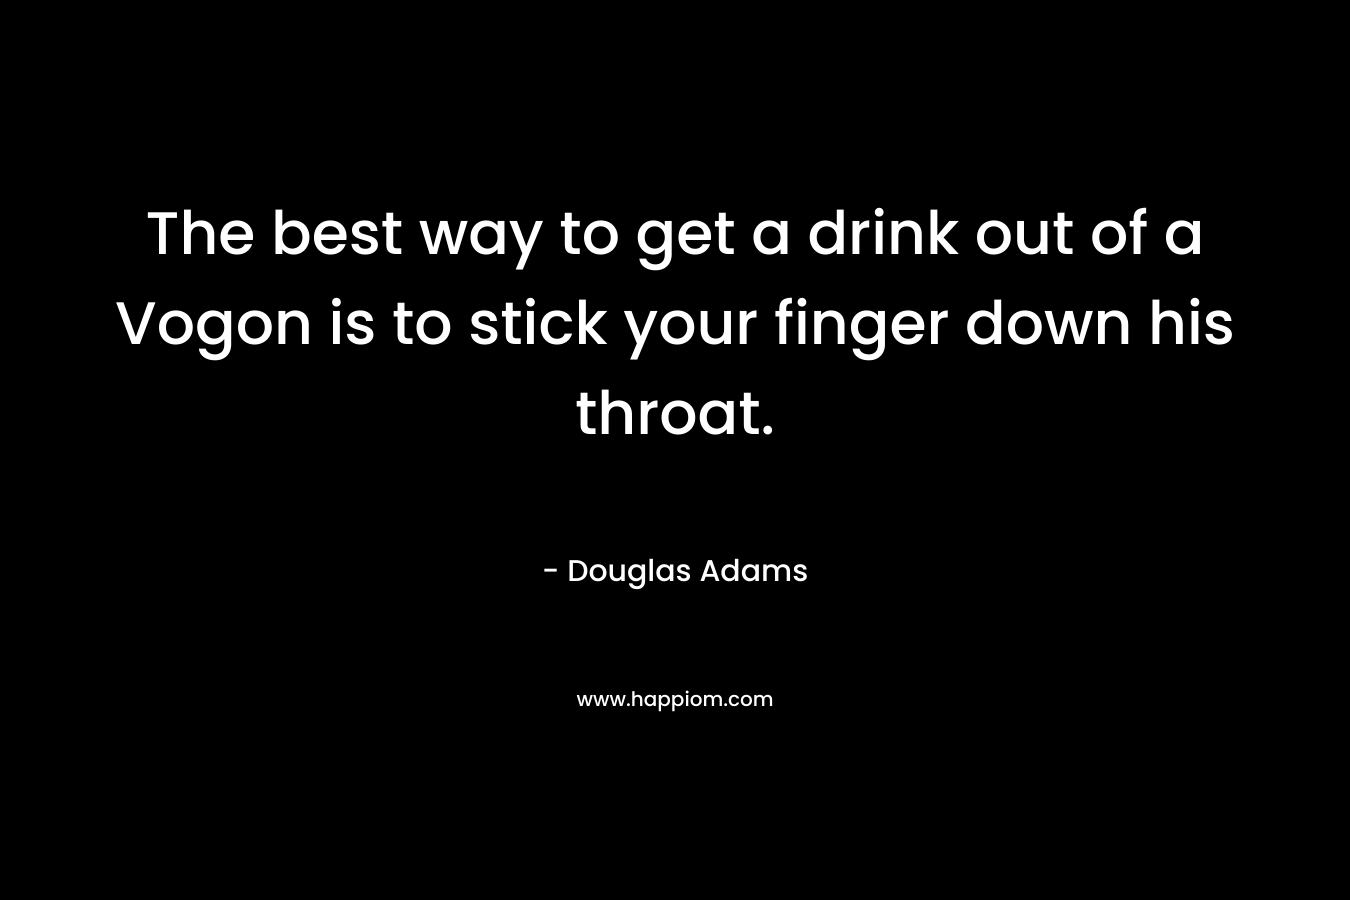 The best way to get a drink out of a Vogon is to stick your finger down his throat. – Douglas Adams